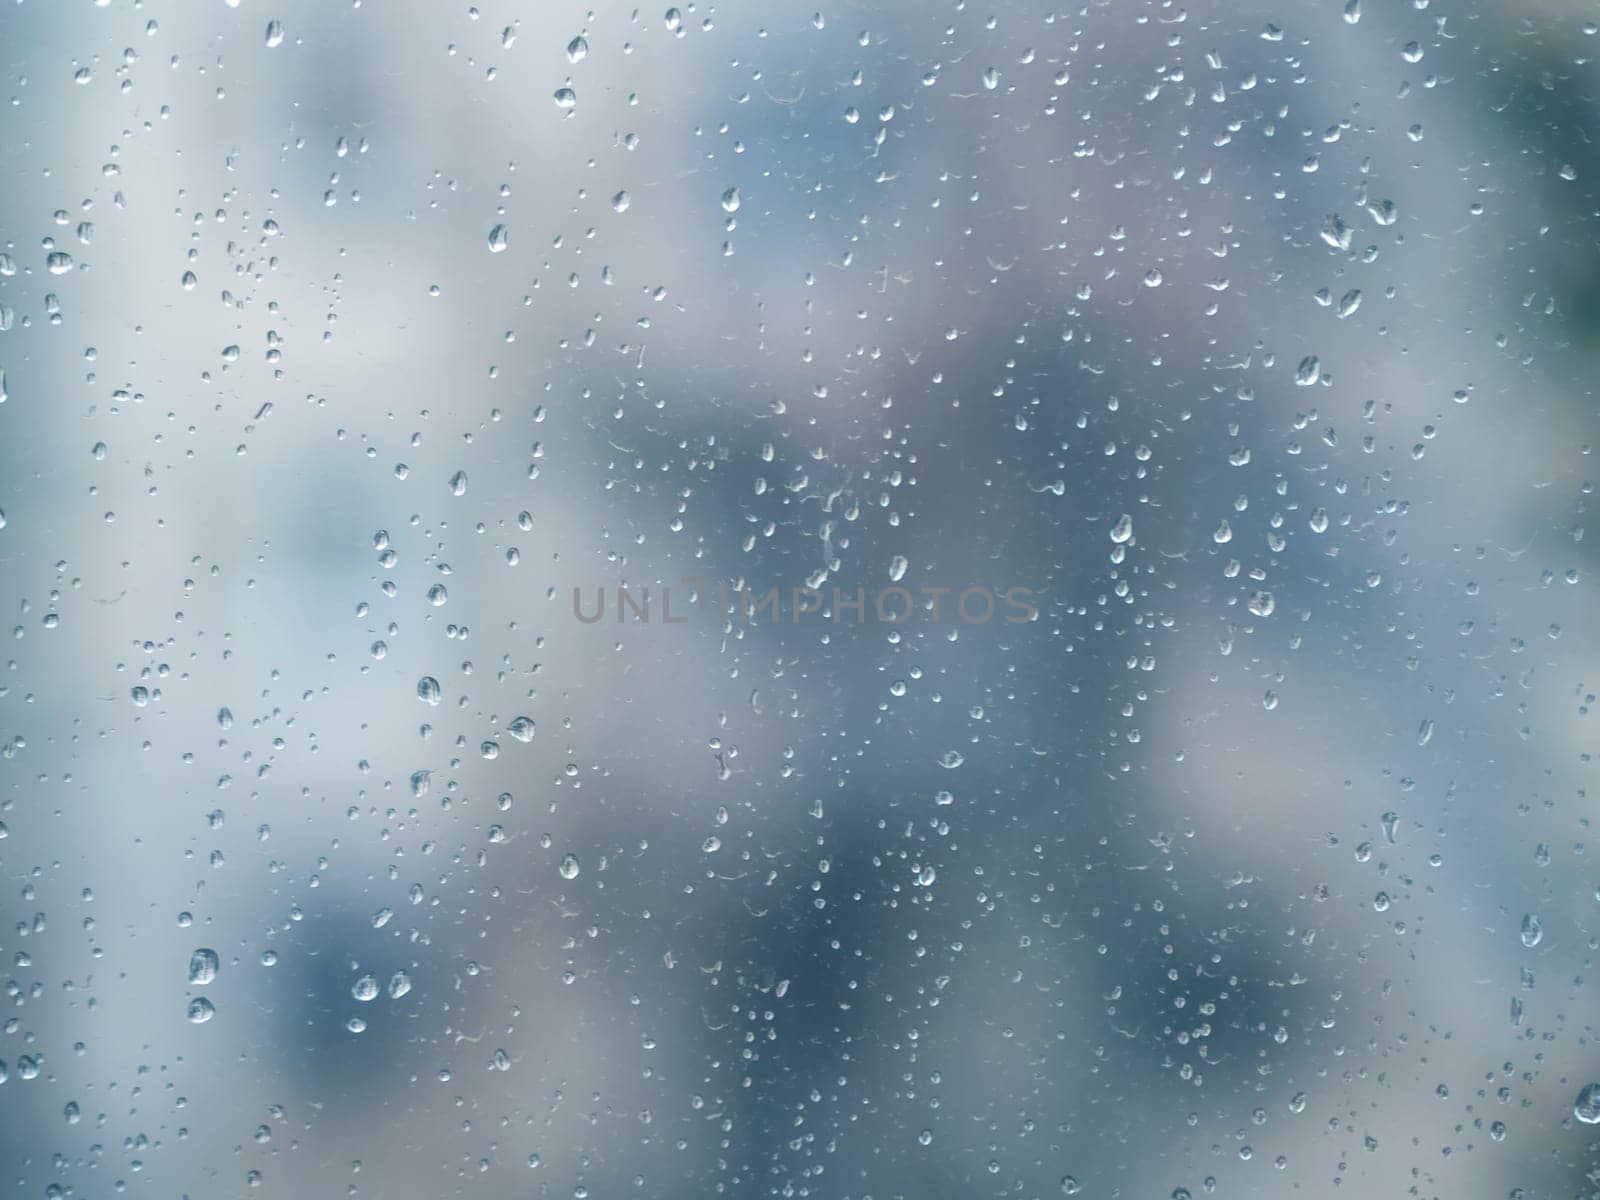 Raindrops on the surface of window glass with a blurred background. by Andre1ns